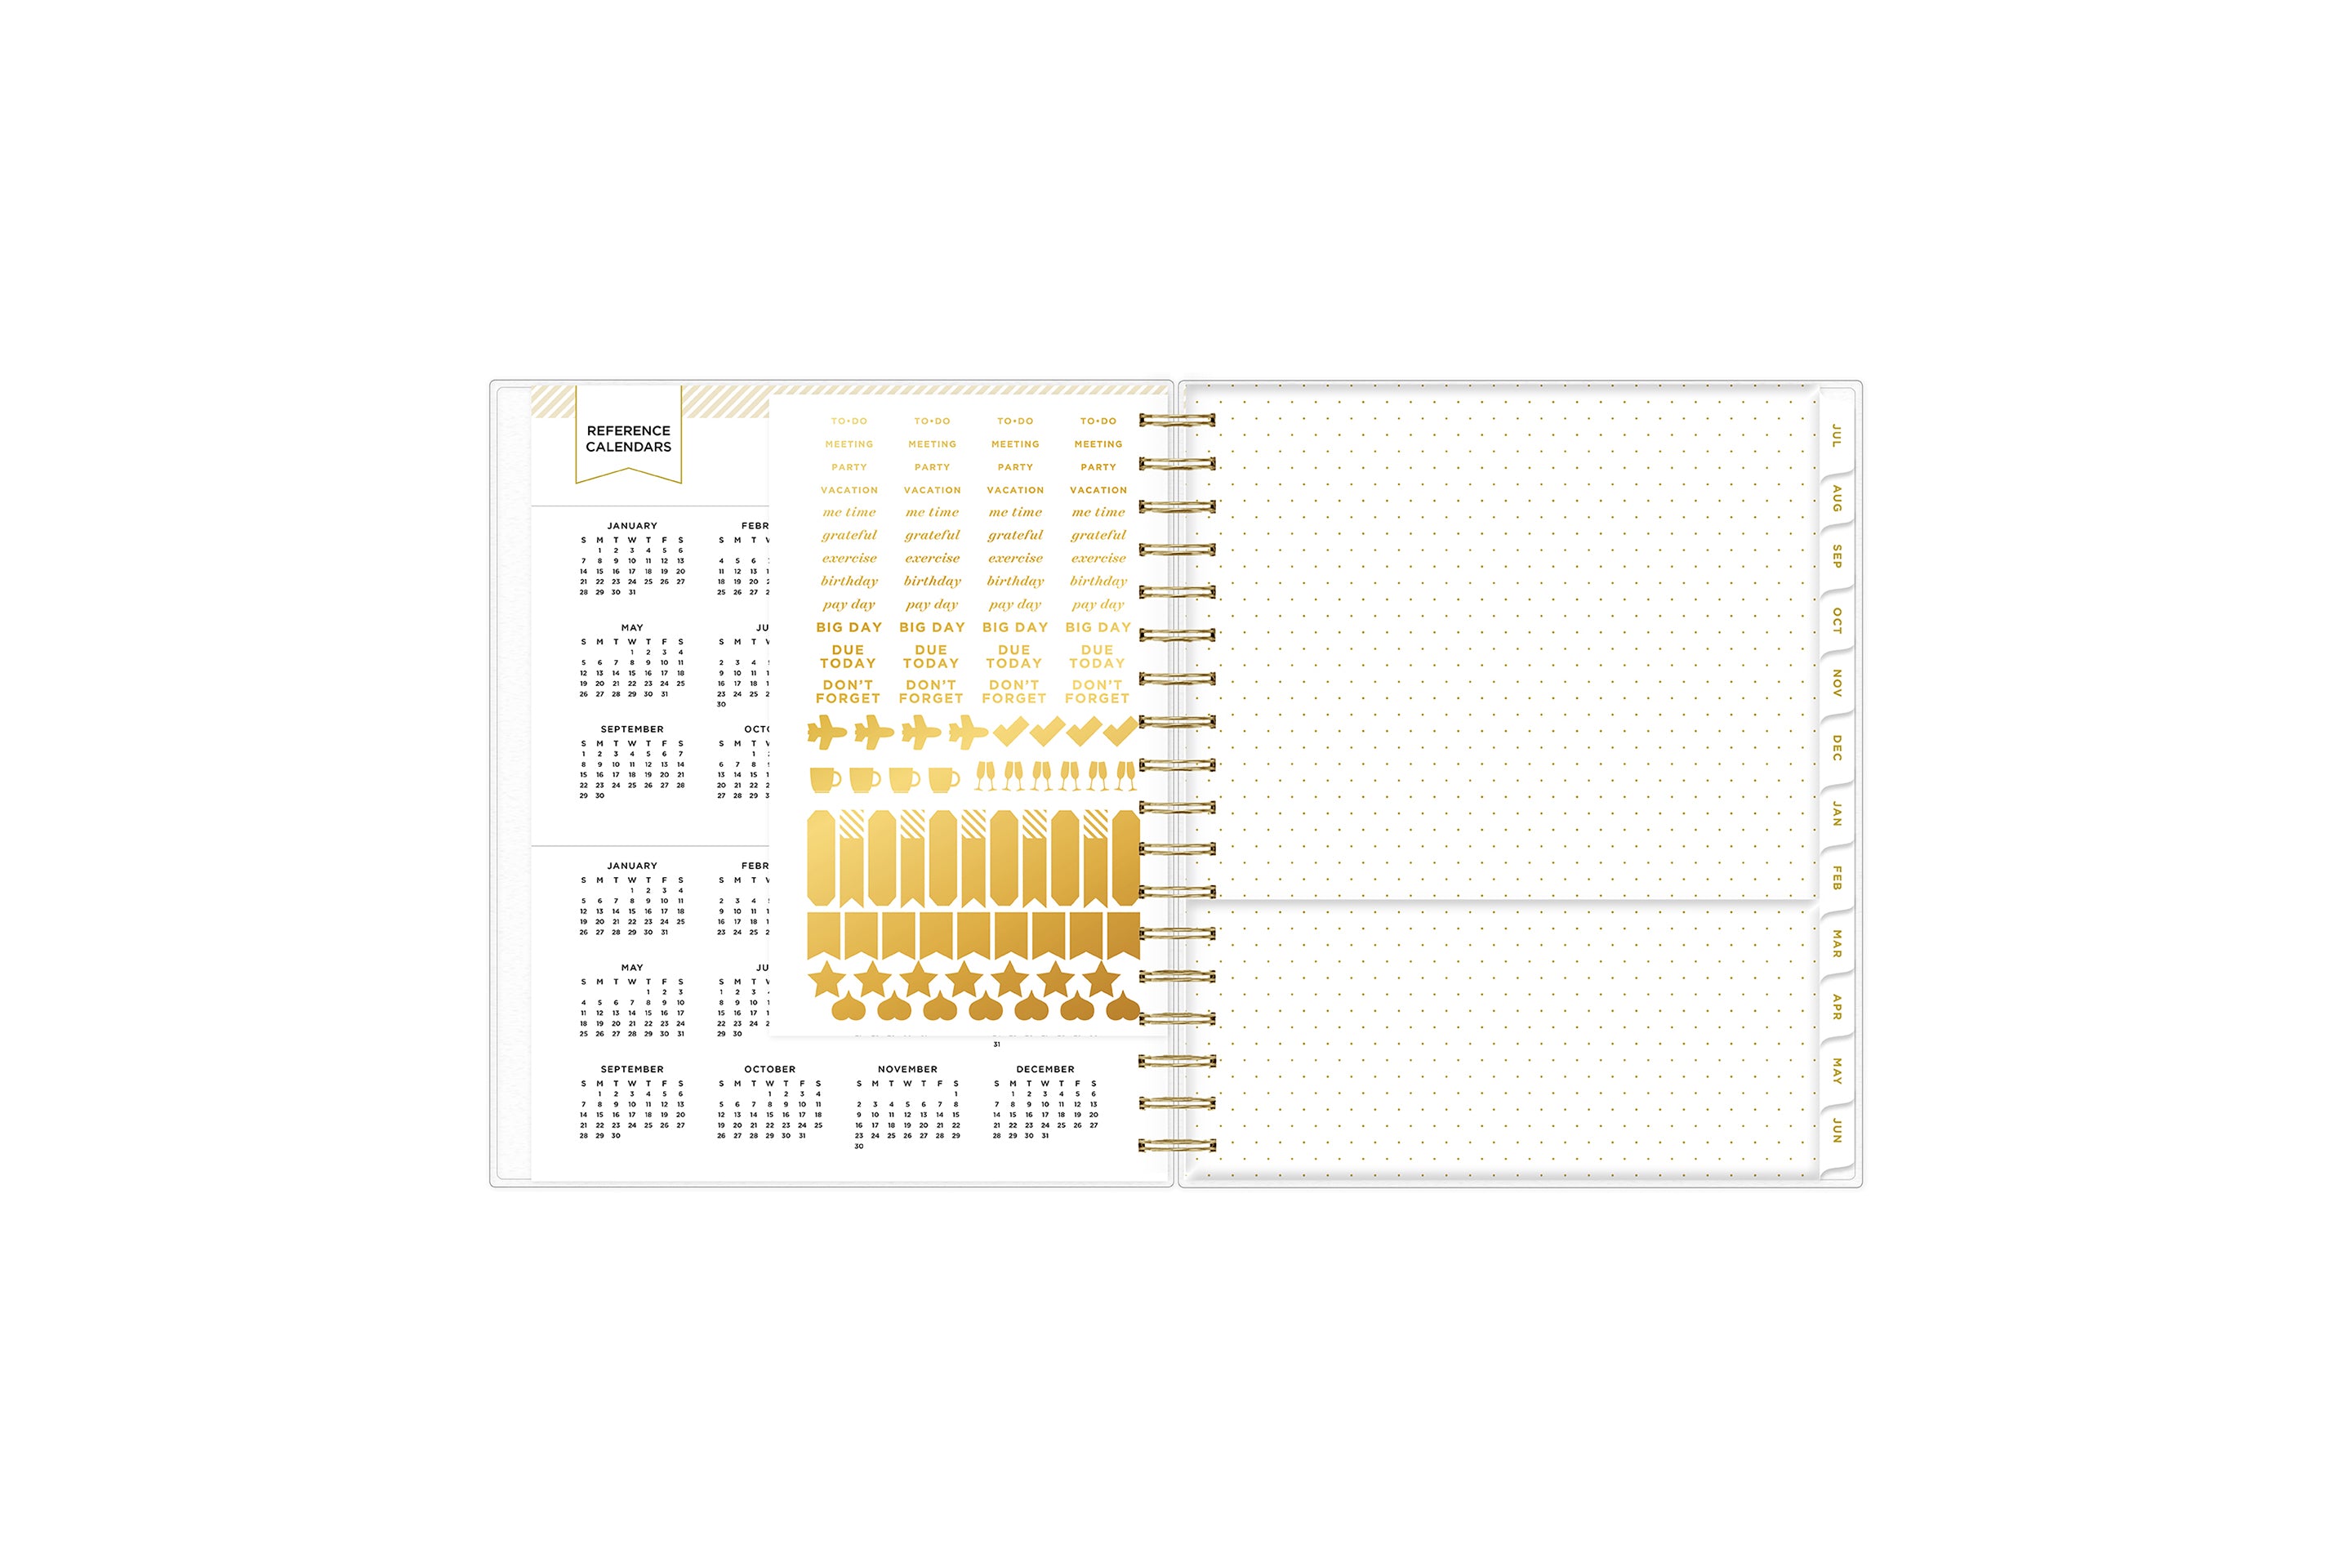 sticker sheet, book mark, paper pocket, and reference calendars